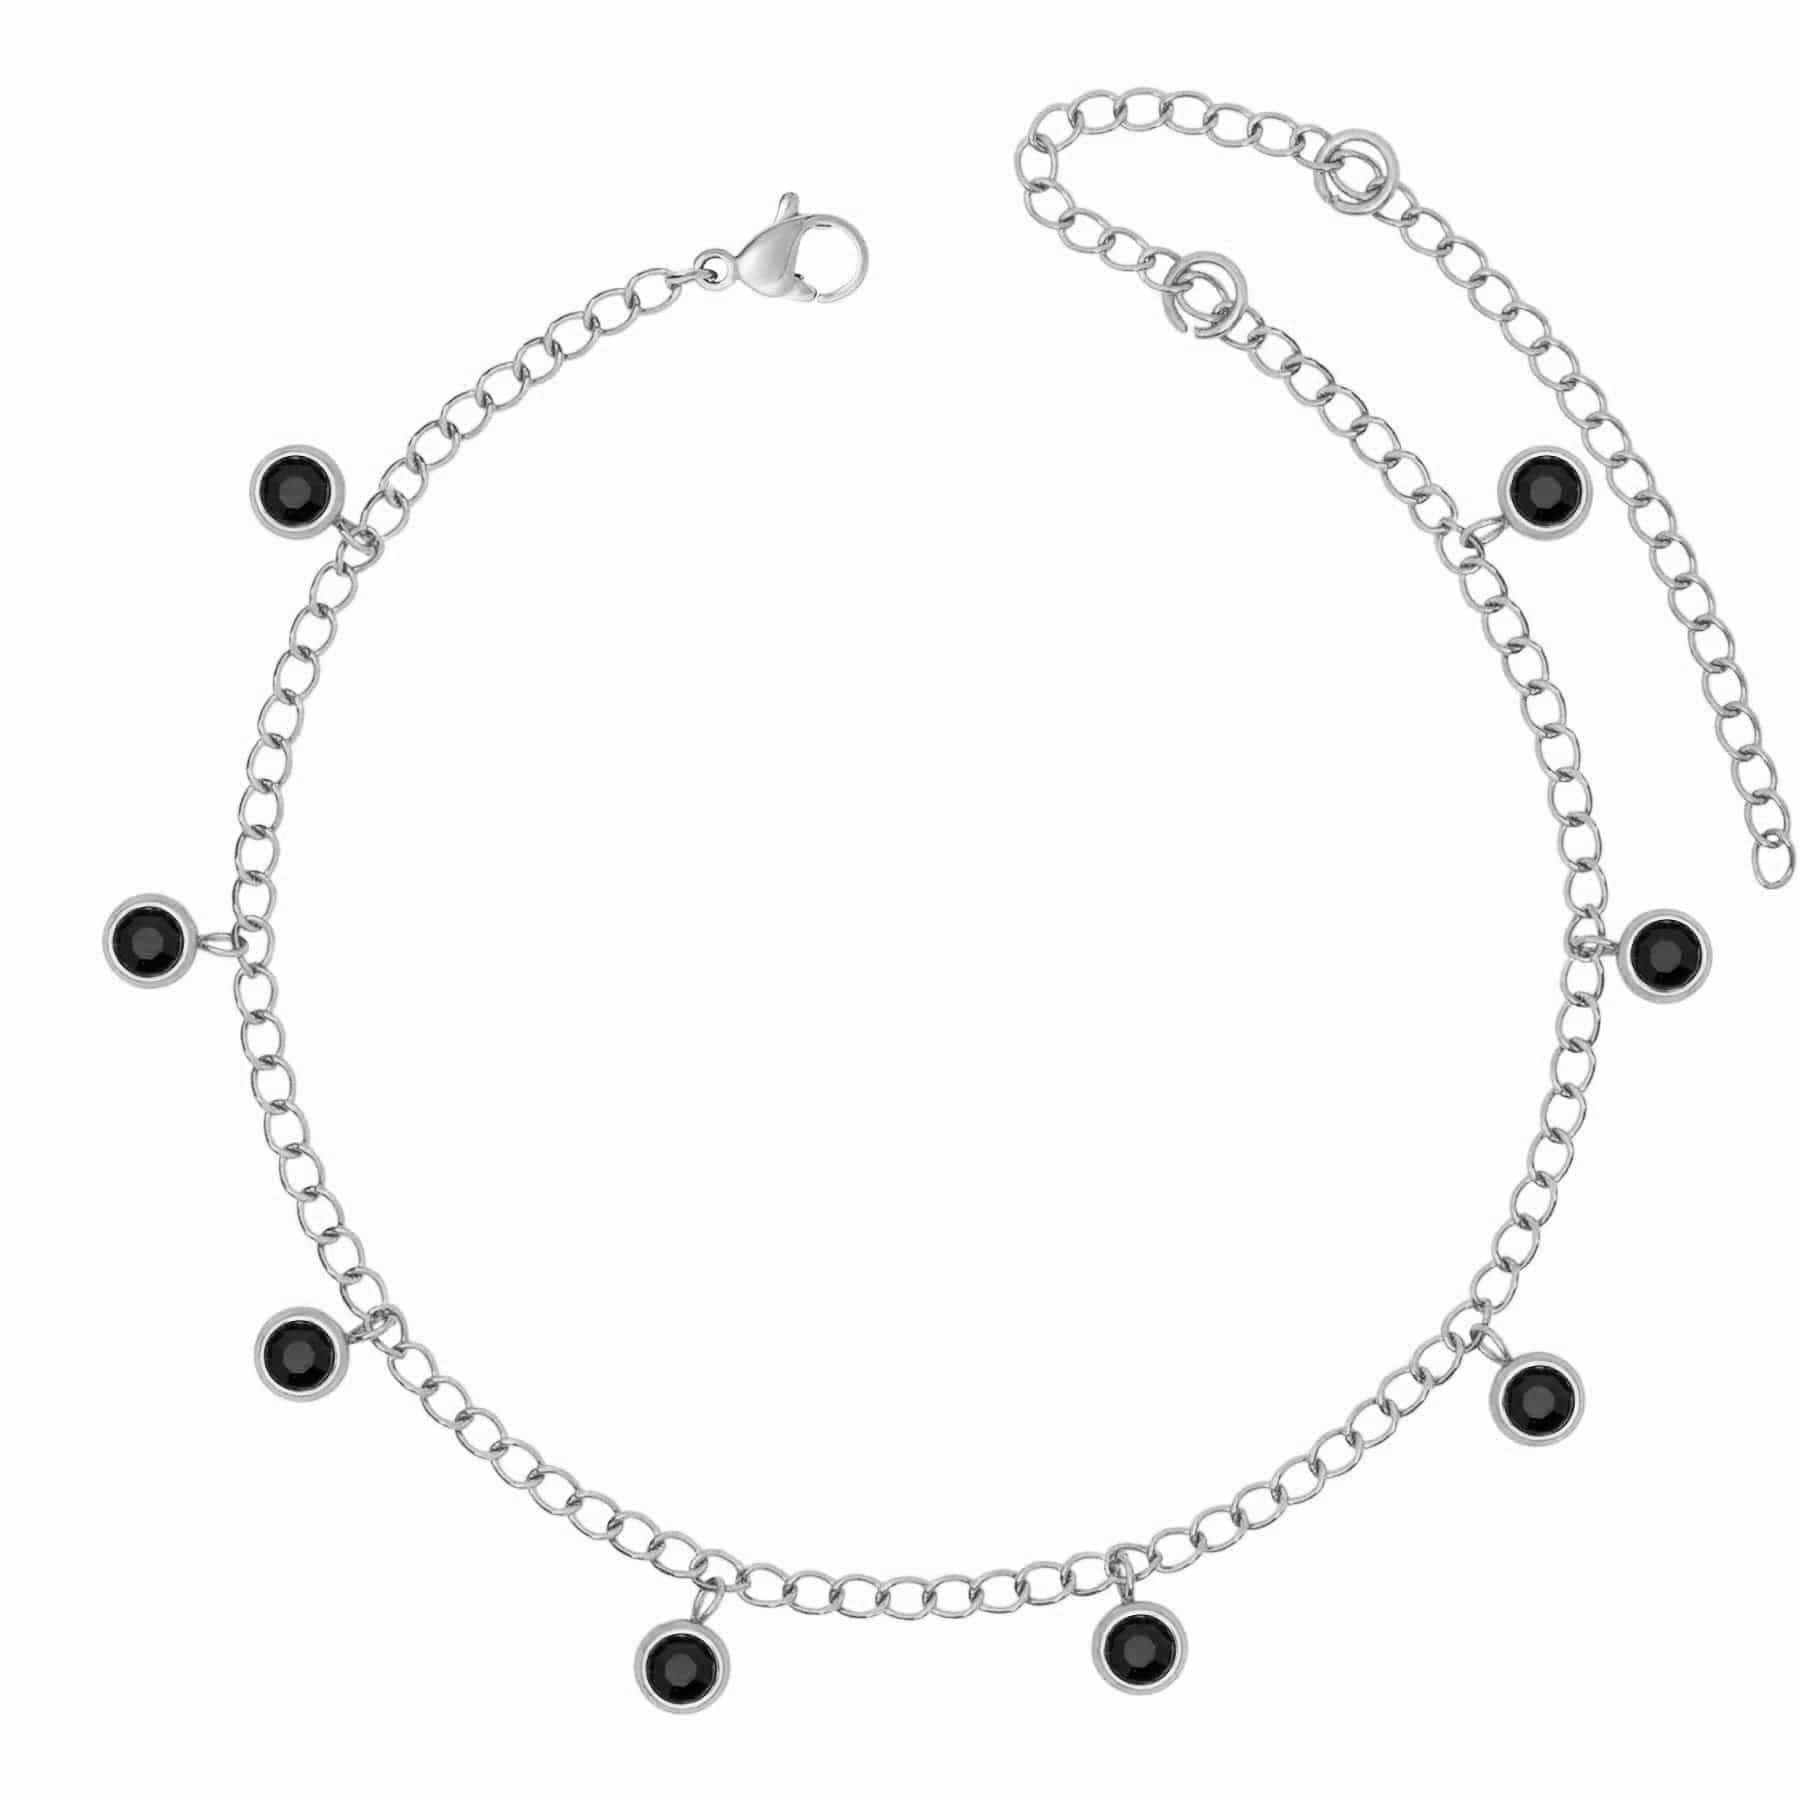 BohoMoon Stainless Steel Sable Anklet Silver